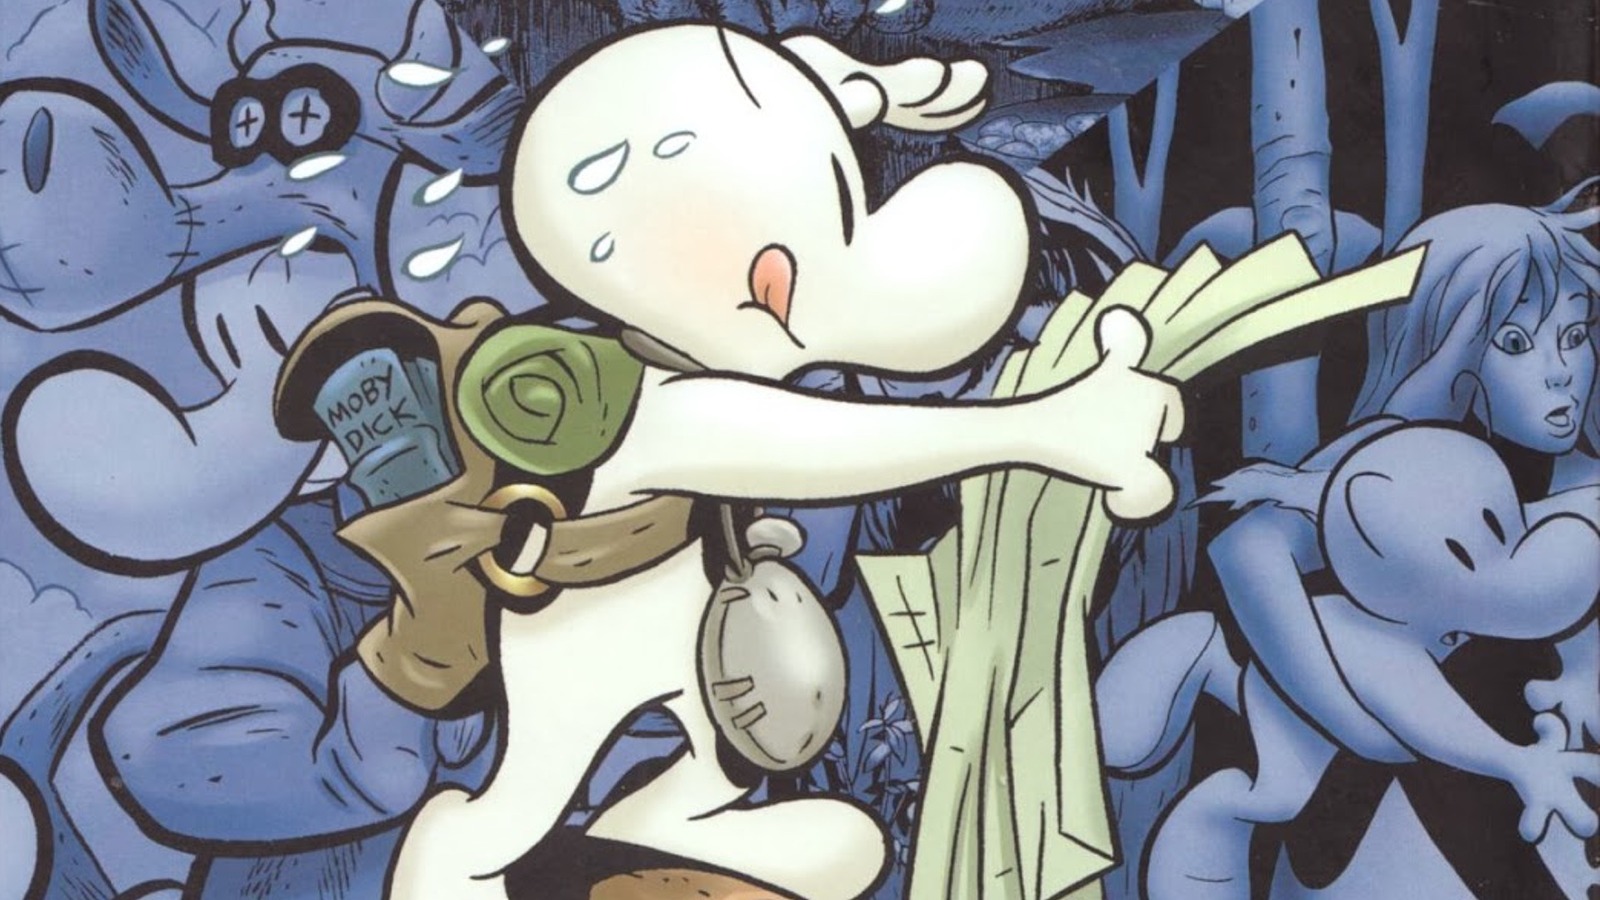 #Bone Creator Jeff Smith Vents Frustration Over Netflix Cancellation (With A Comic Strip)